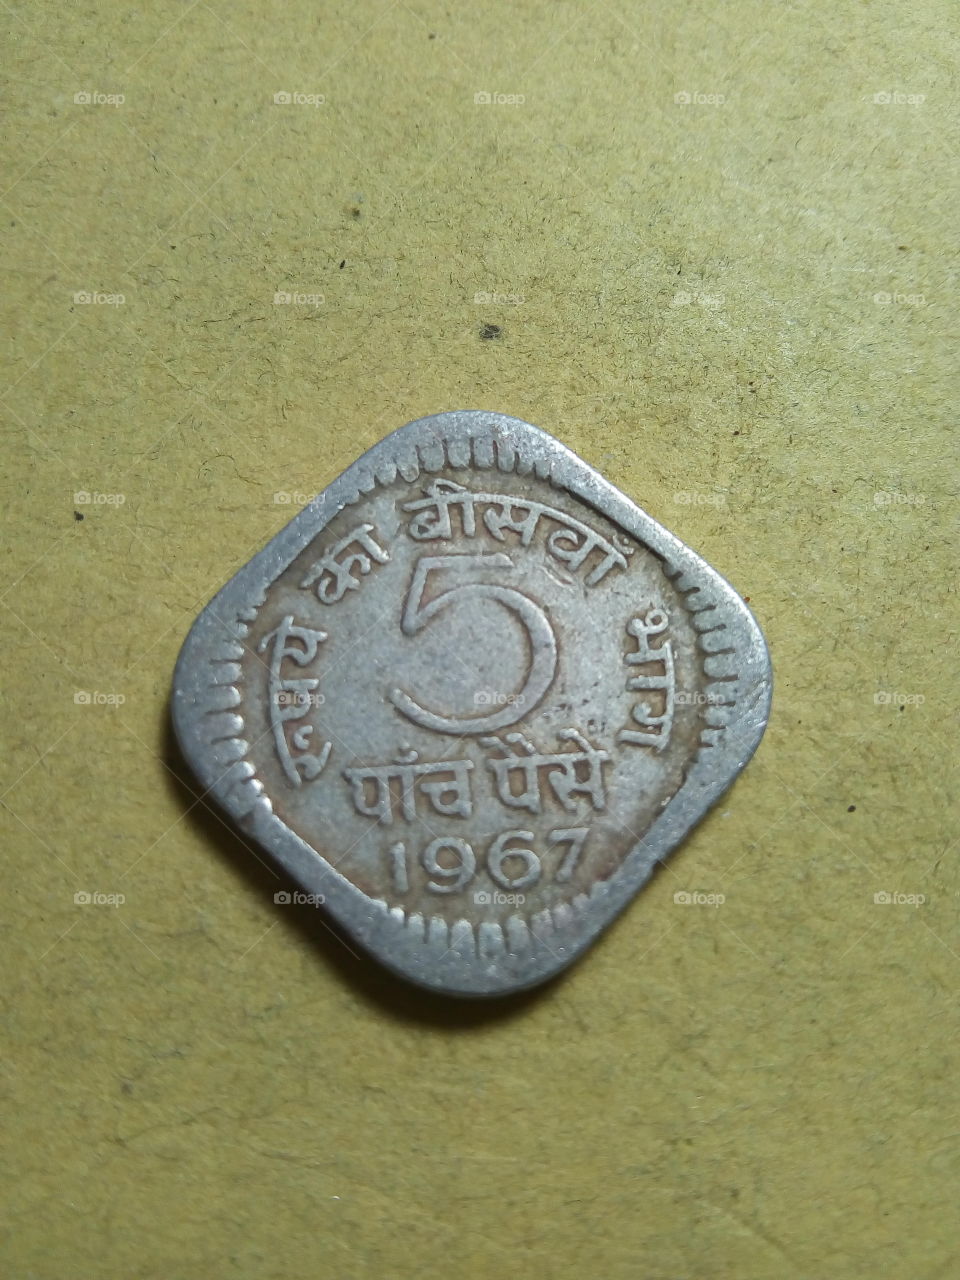 A coin of five paise- 1/20 share of Indian Rupee issued by Government of India in 1967.